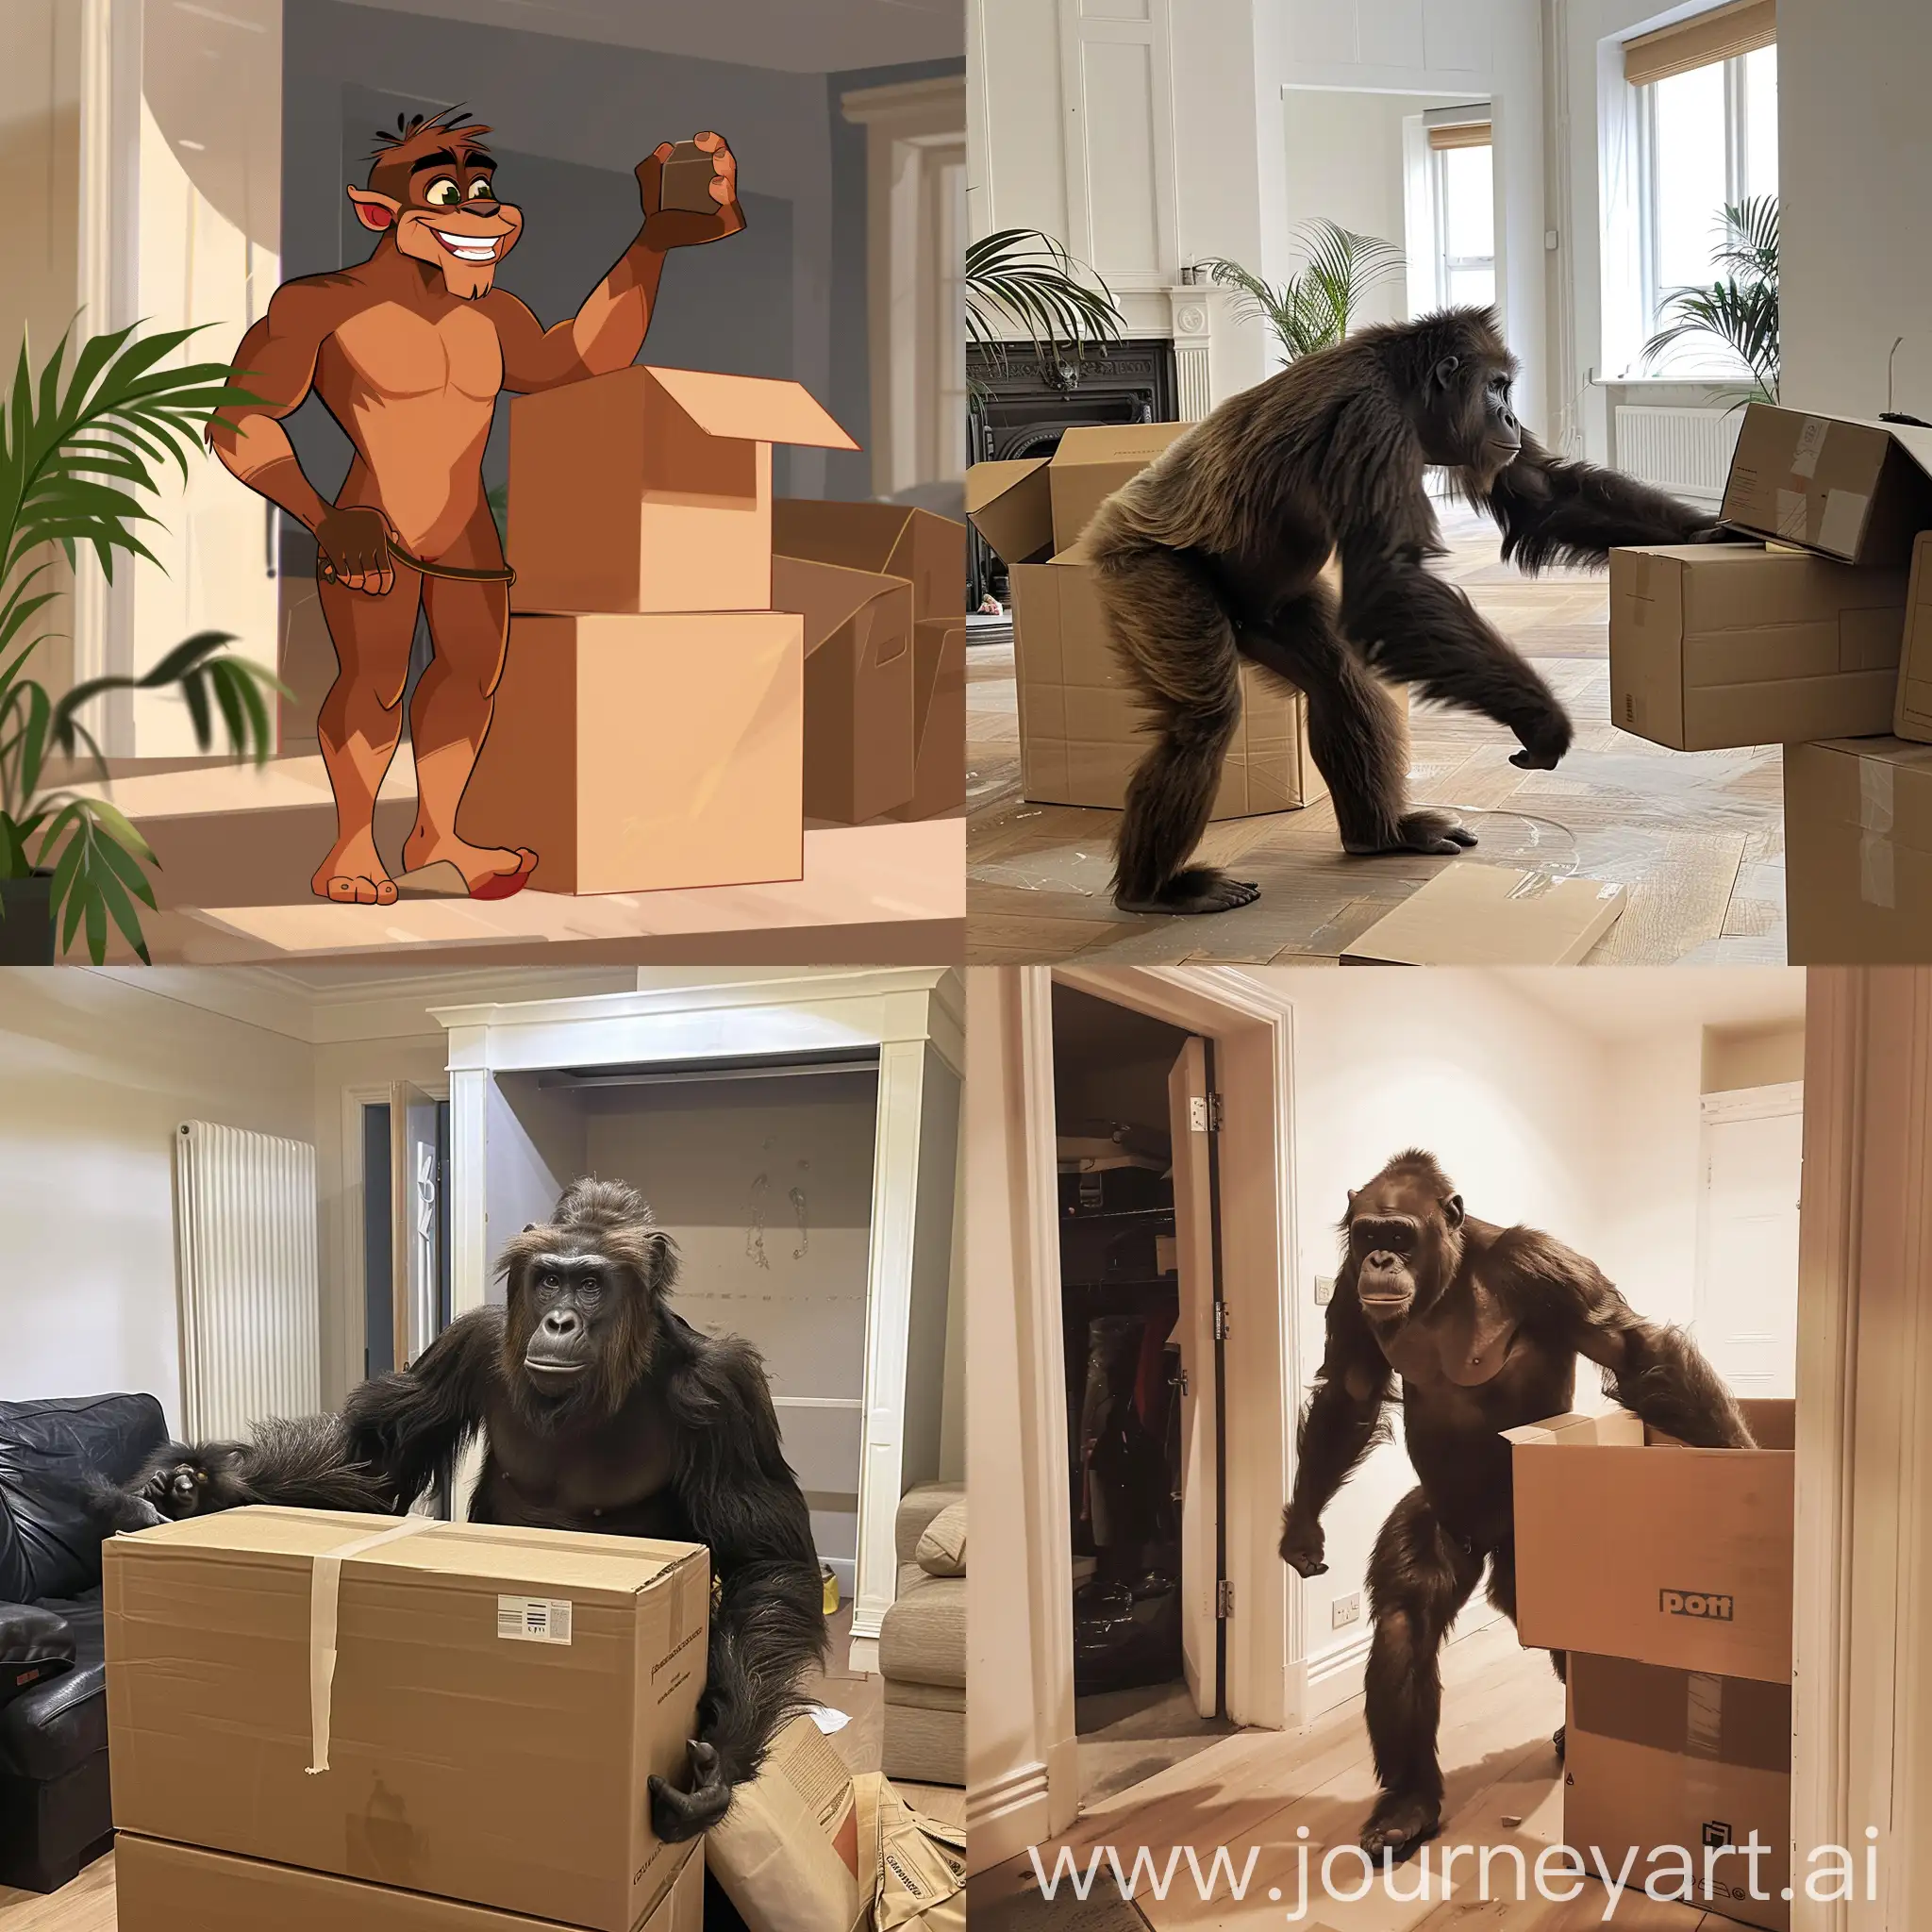 Tarzan-Relishing-the-Excitement-of-Moving-into-a-New-Flat